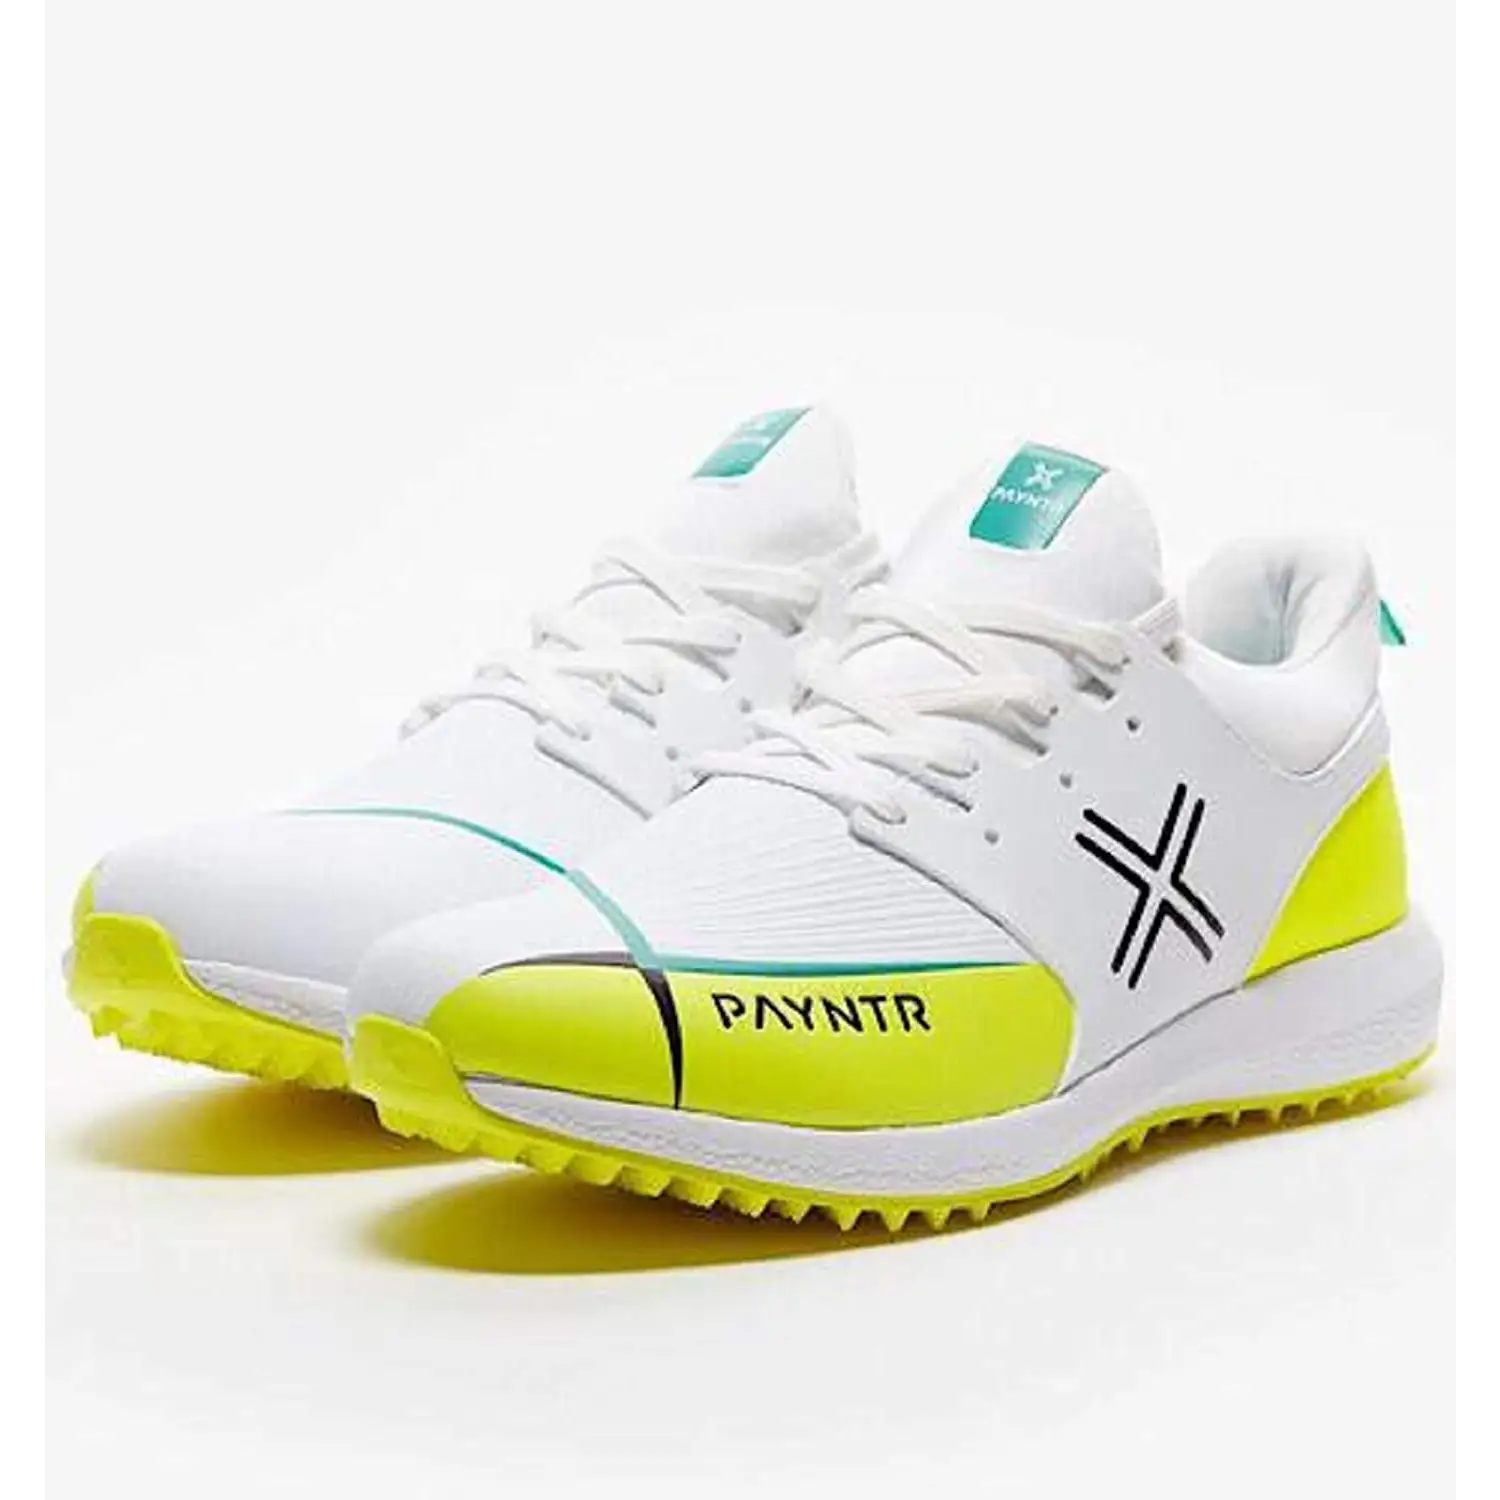 Payntr X Cricket Shoes White & Yellow Pimple Rubber Sole - FOOTWEAR - RUBBER SOLE